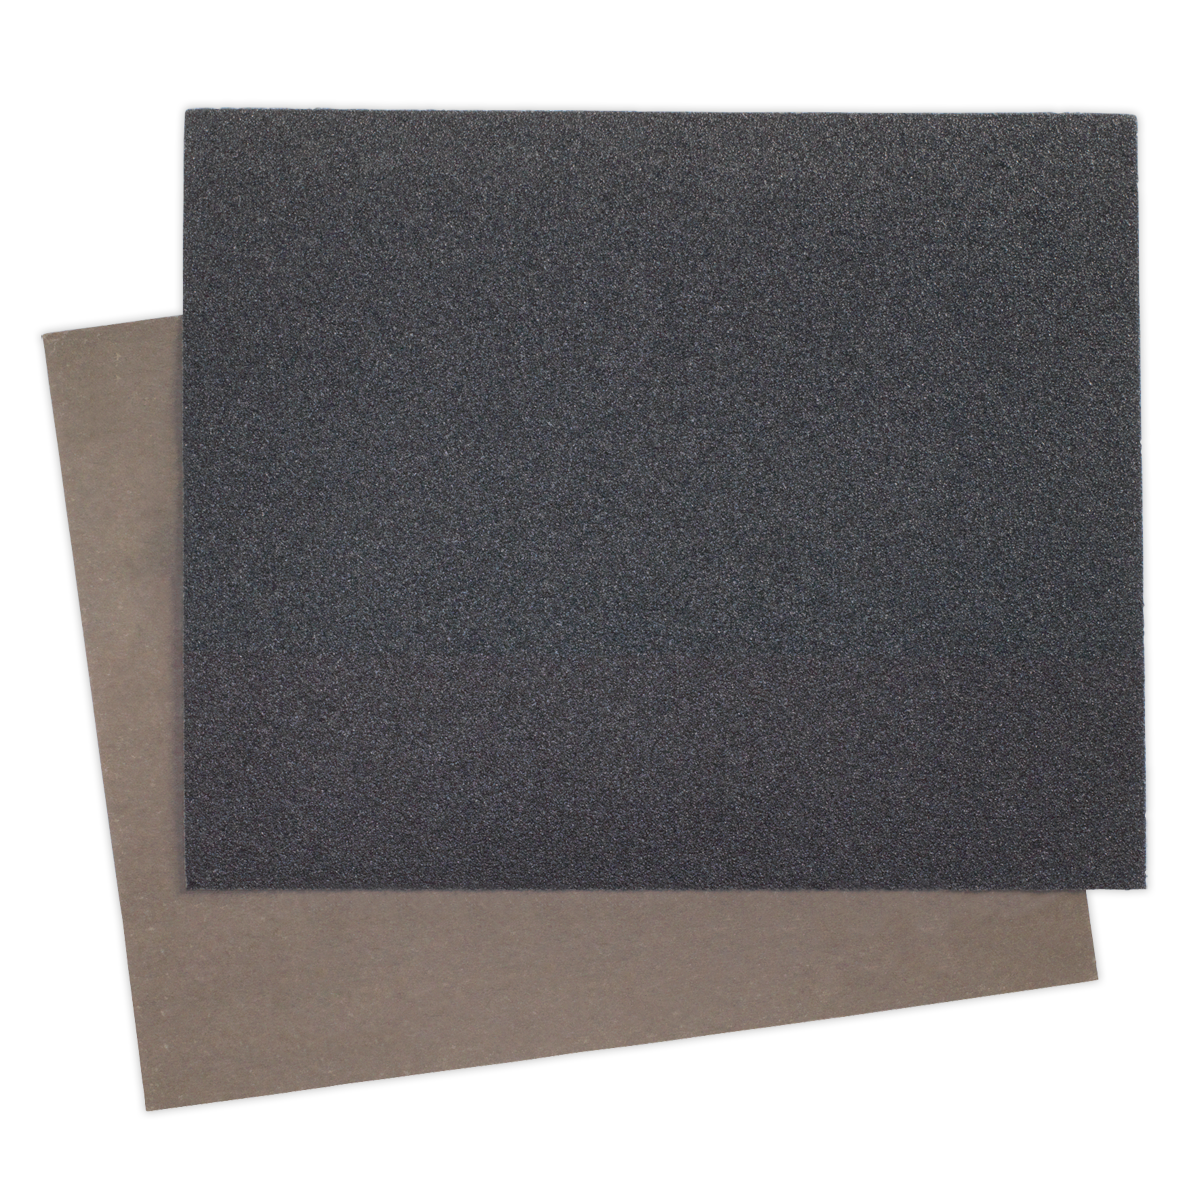 Wet & Dry Paper 230 x 280mm 120Grit Pack of 25 - WD2328120 - Farming Parts